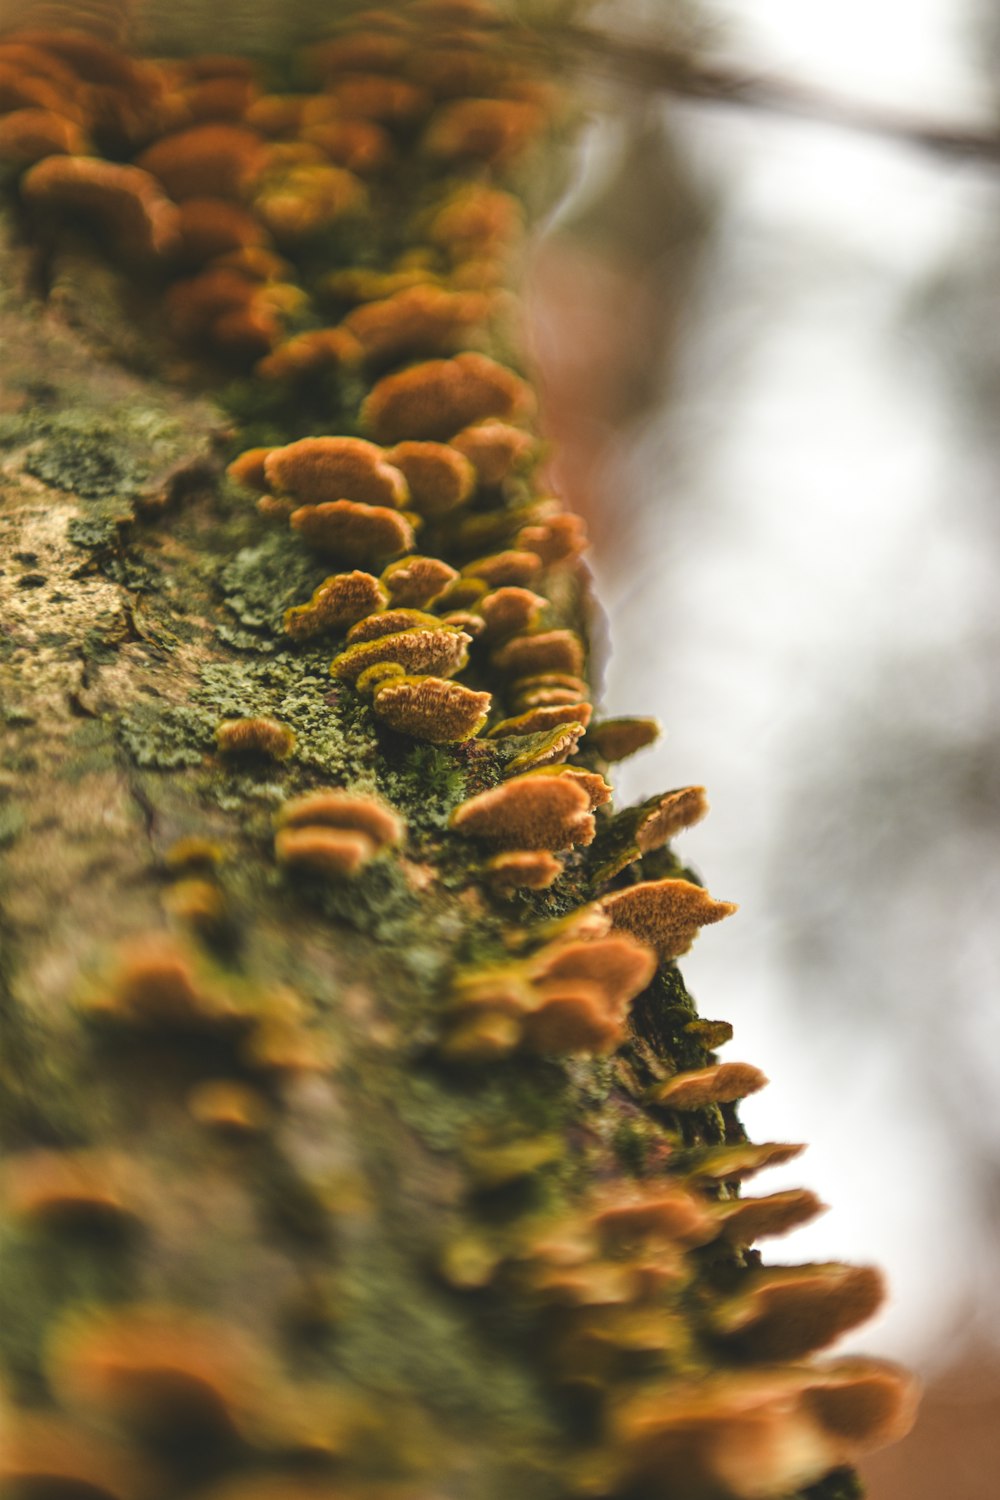 a close up of a tree trunk with many mushrooms growing on it